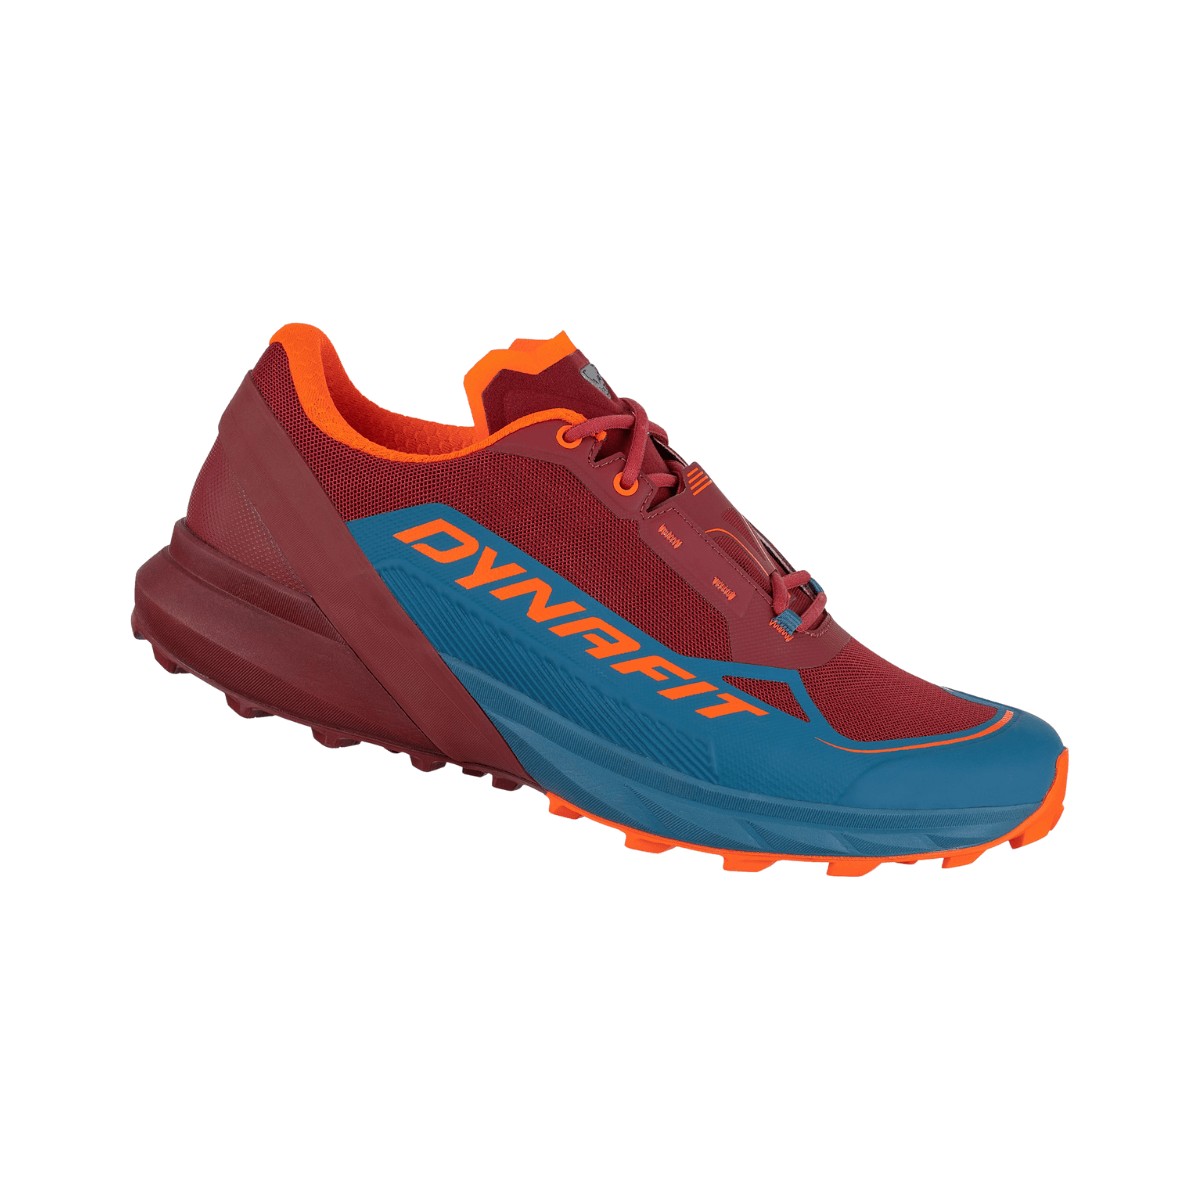 Chaussures Dynafit Ultra 50 Bleu Rouge AW22, Taille 41 - EUR